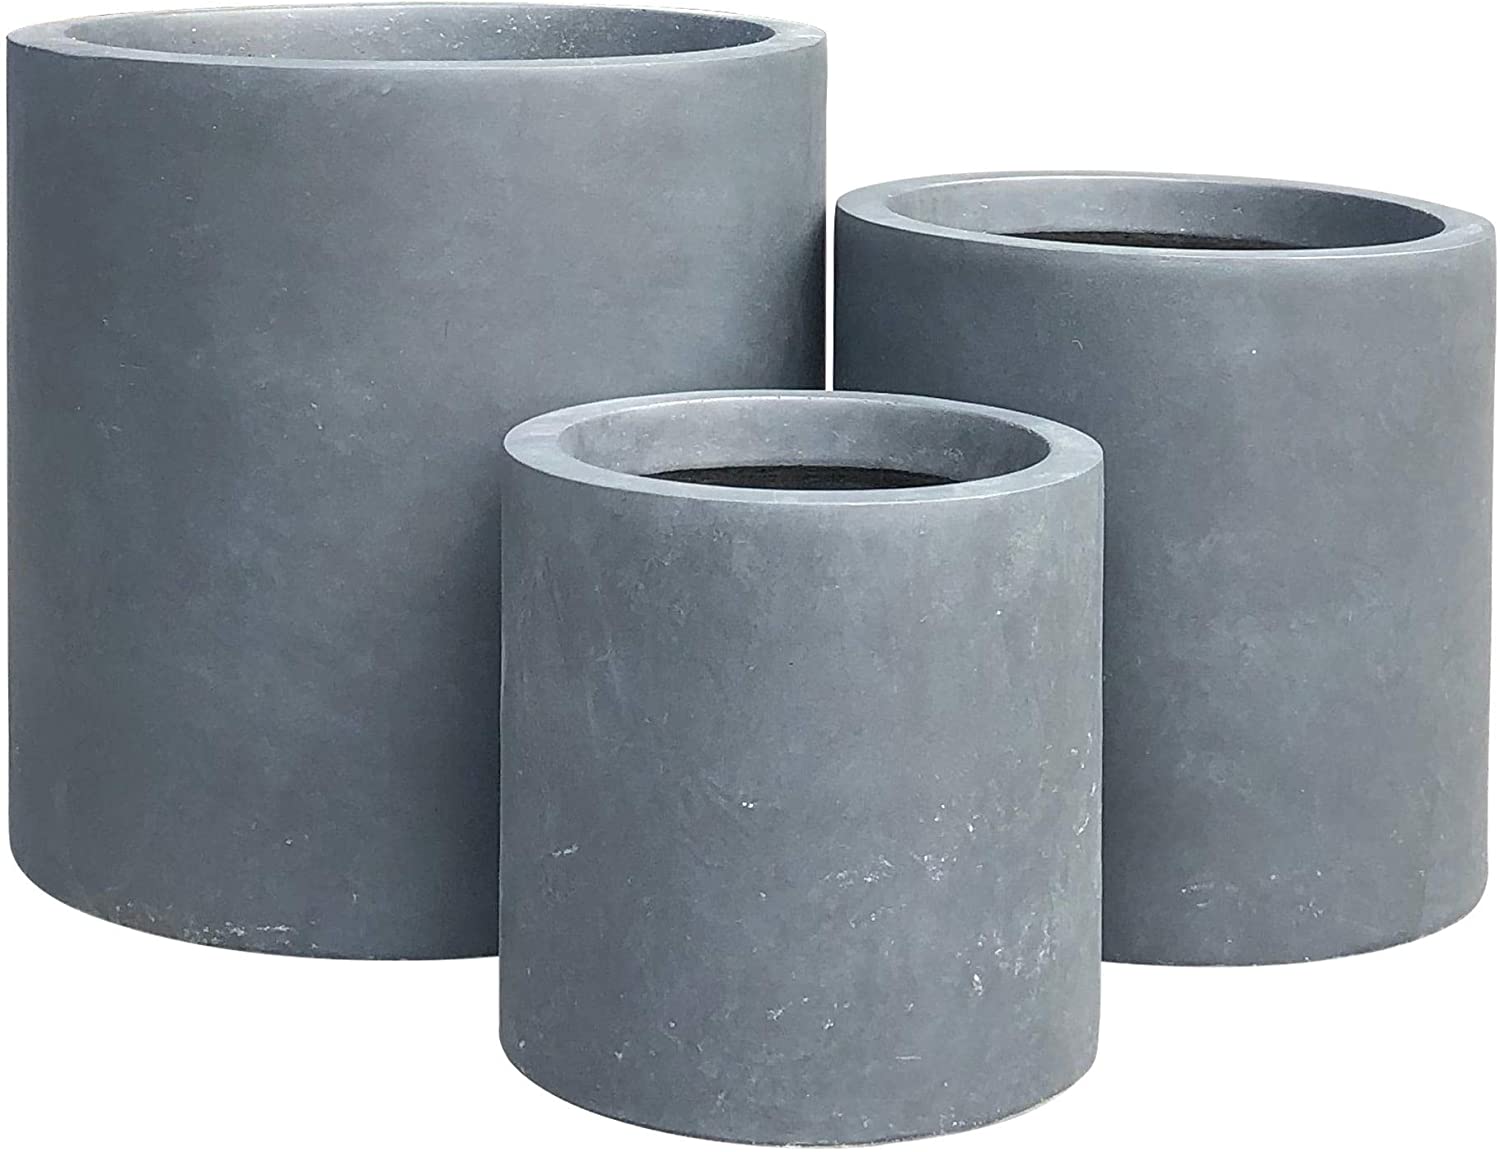 Unknown1 Set 3 Cylindrical Planters 15 8 12 6 9 8 Inch Tall Charcoal Black Round Concrete